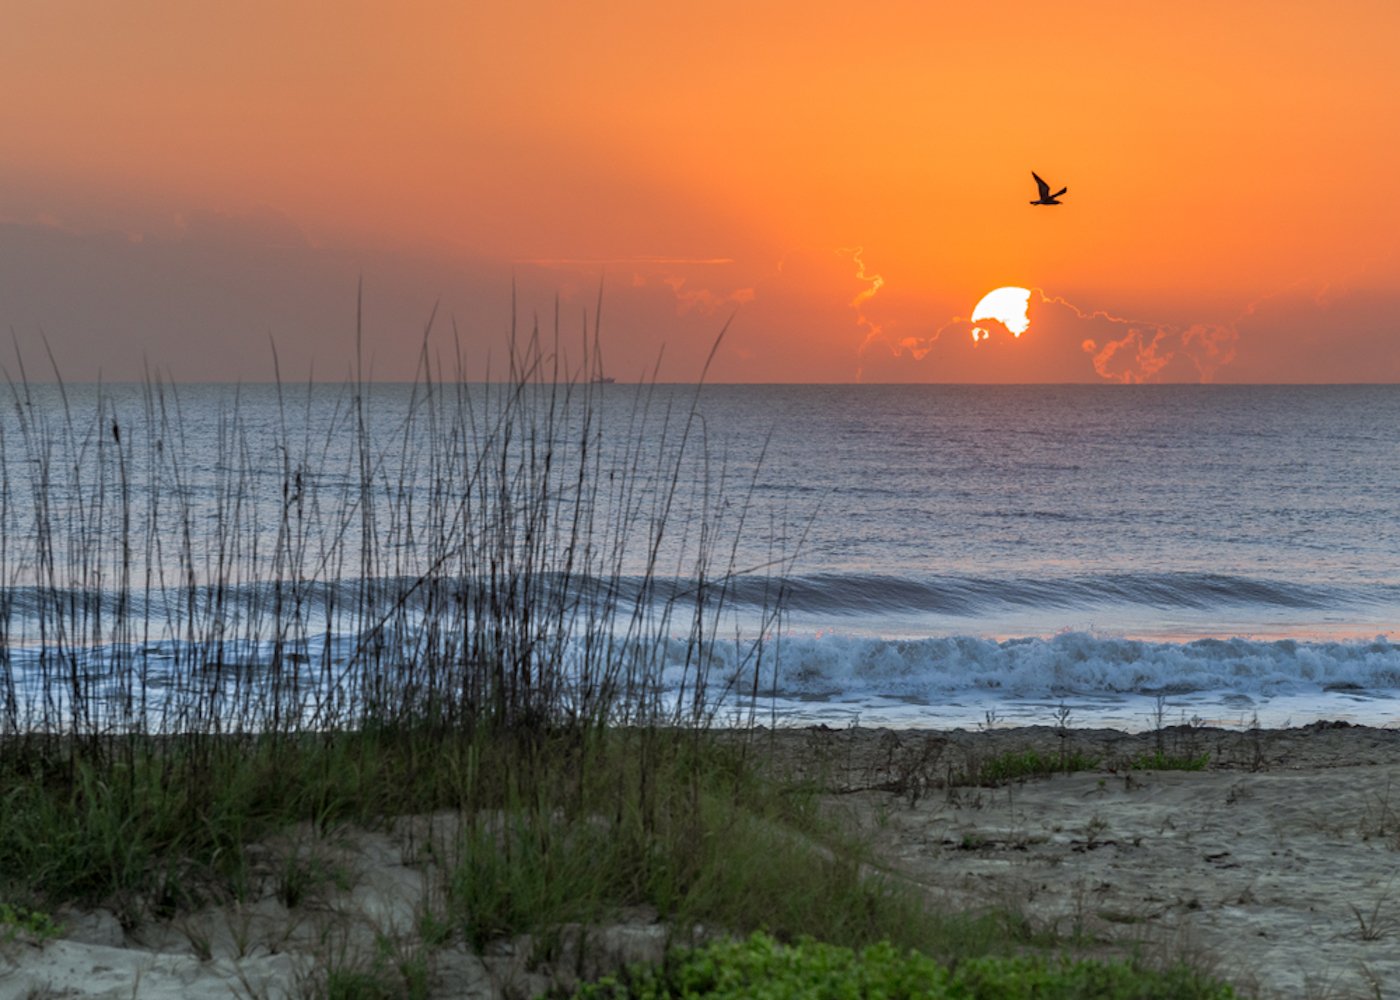 A bird flies in front of the sunrise in Coco Beach, Florida, USA.